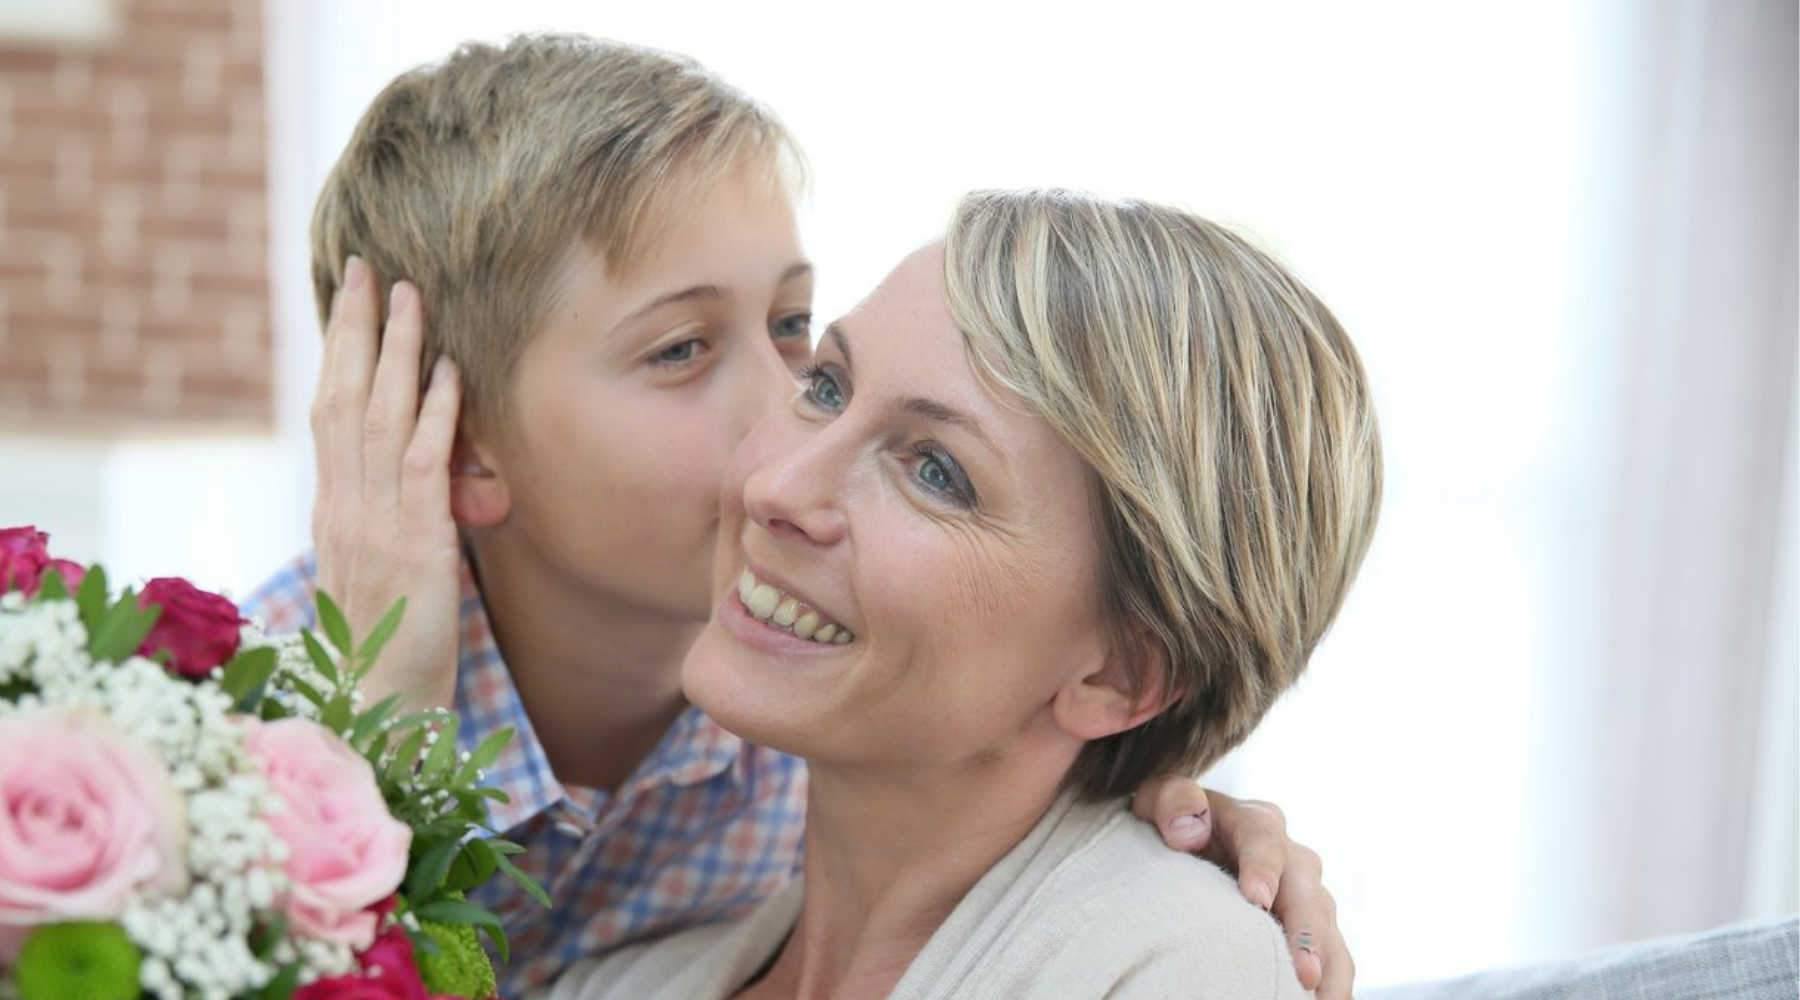 Mother's Day Gift Ideas In Christchurch For Delivery Sunday 8th May 2022 - Citywide Florist Christchurch